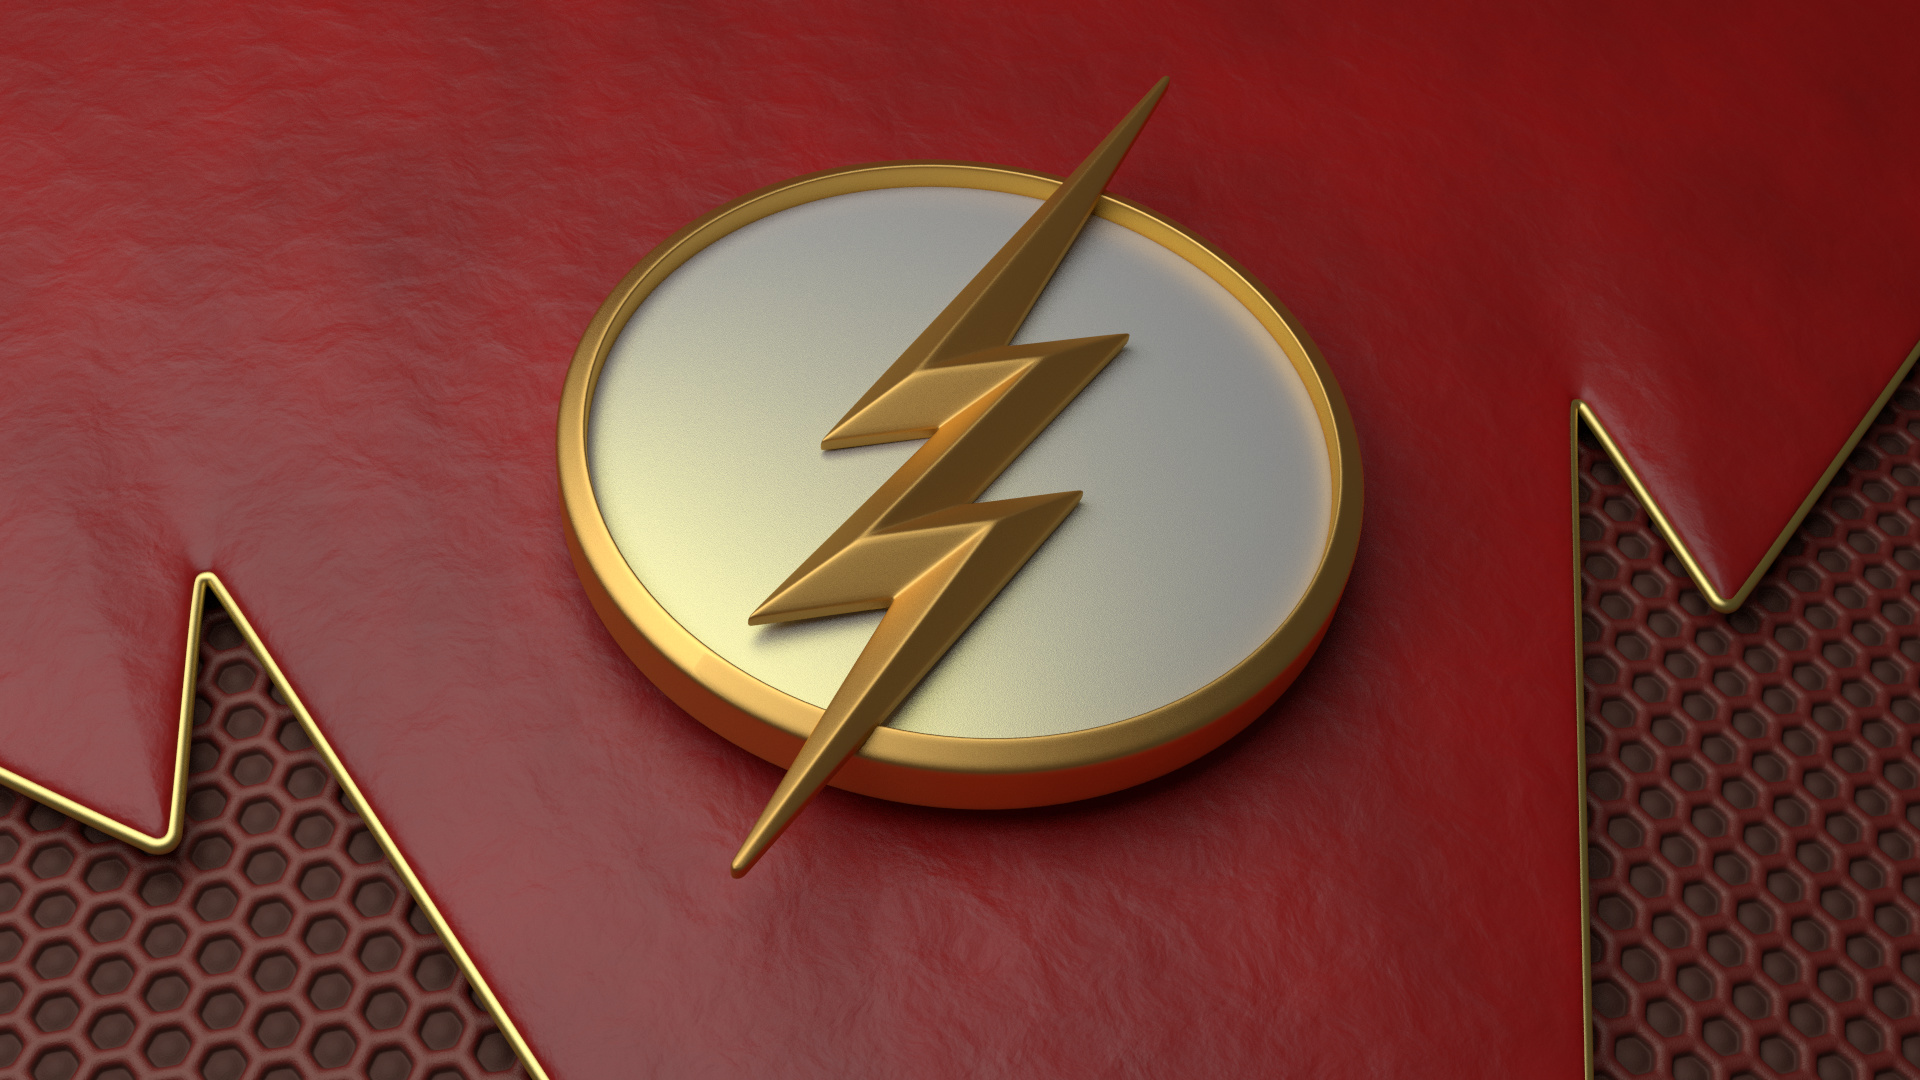 The Flash Wallpapers 1920x1080 - Album on Imgur